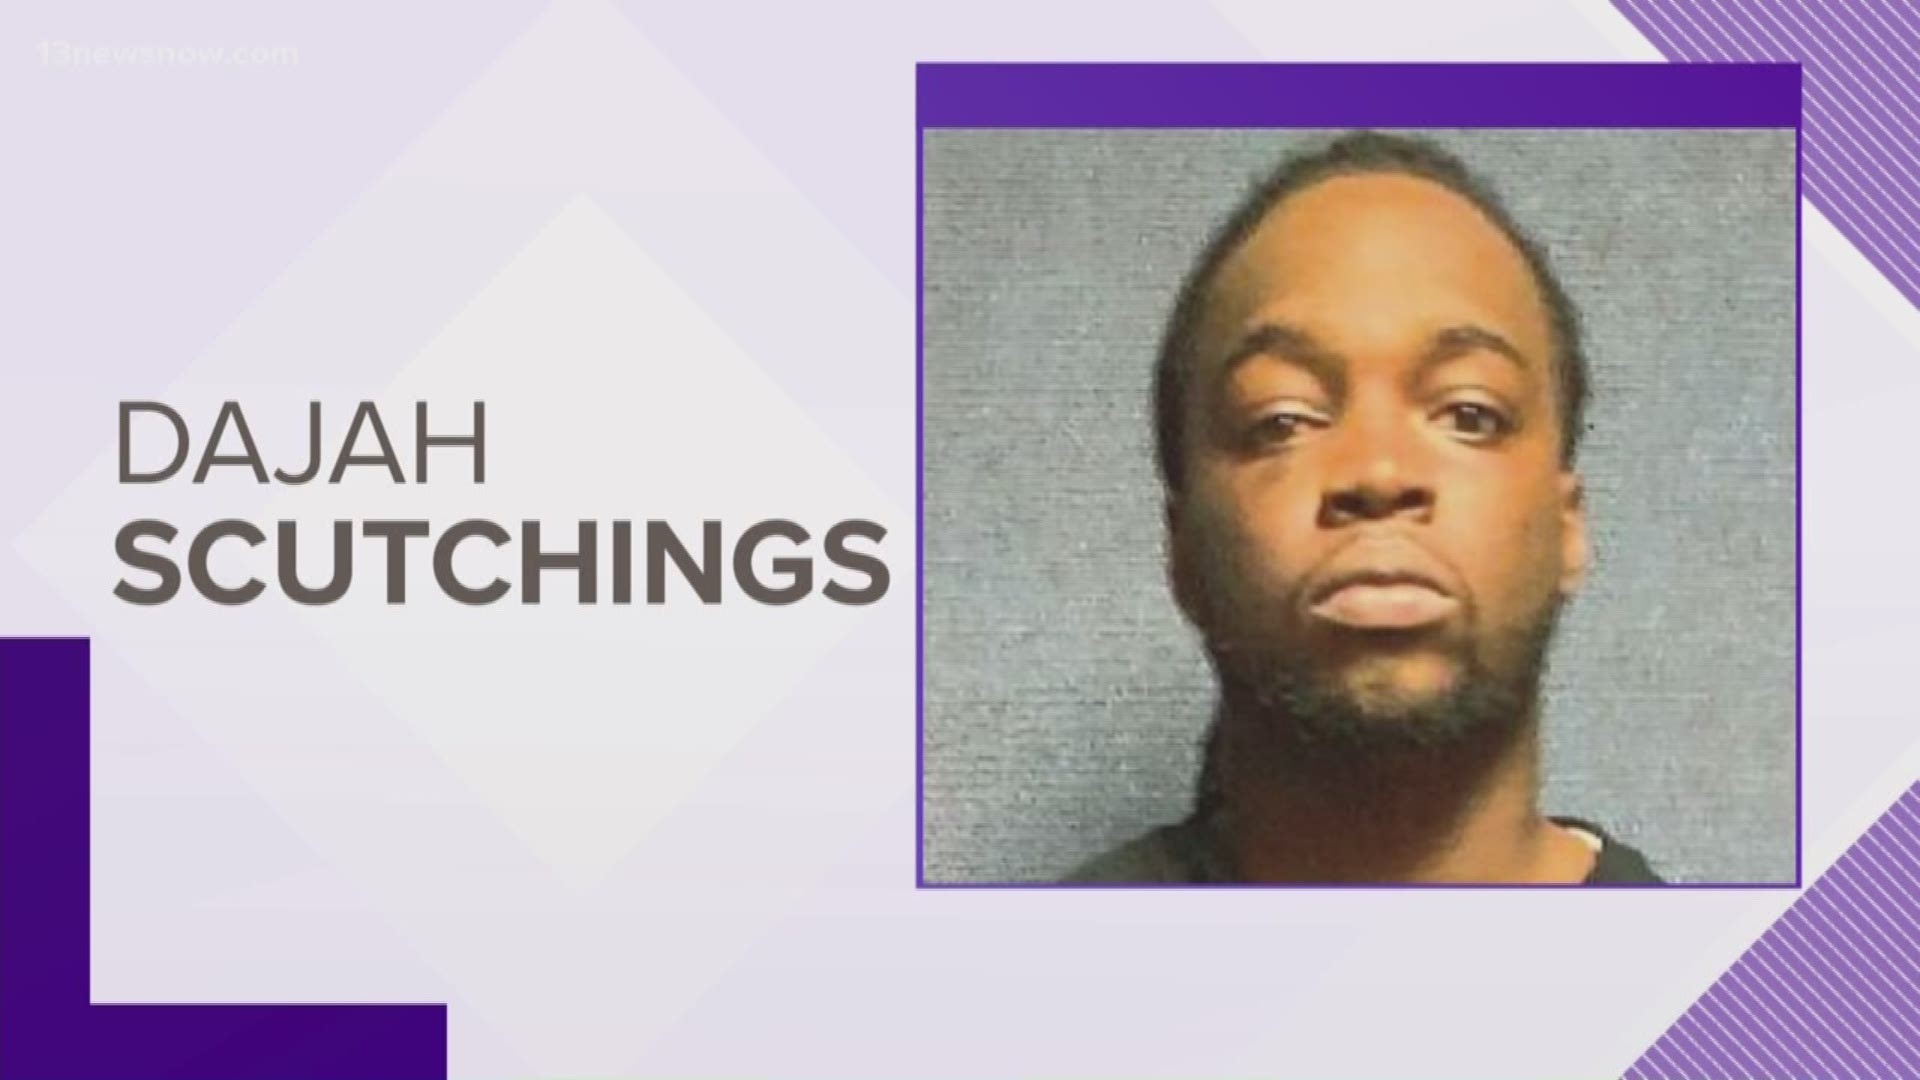 Dajah Scutchings, 25, was arrested in connection to a shooting on Granby Street in August that injured two people. Scutchings will be held in Norfolk City Jail without bond once he is finished being processed.